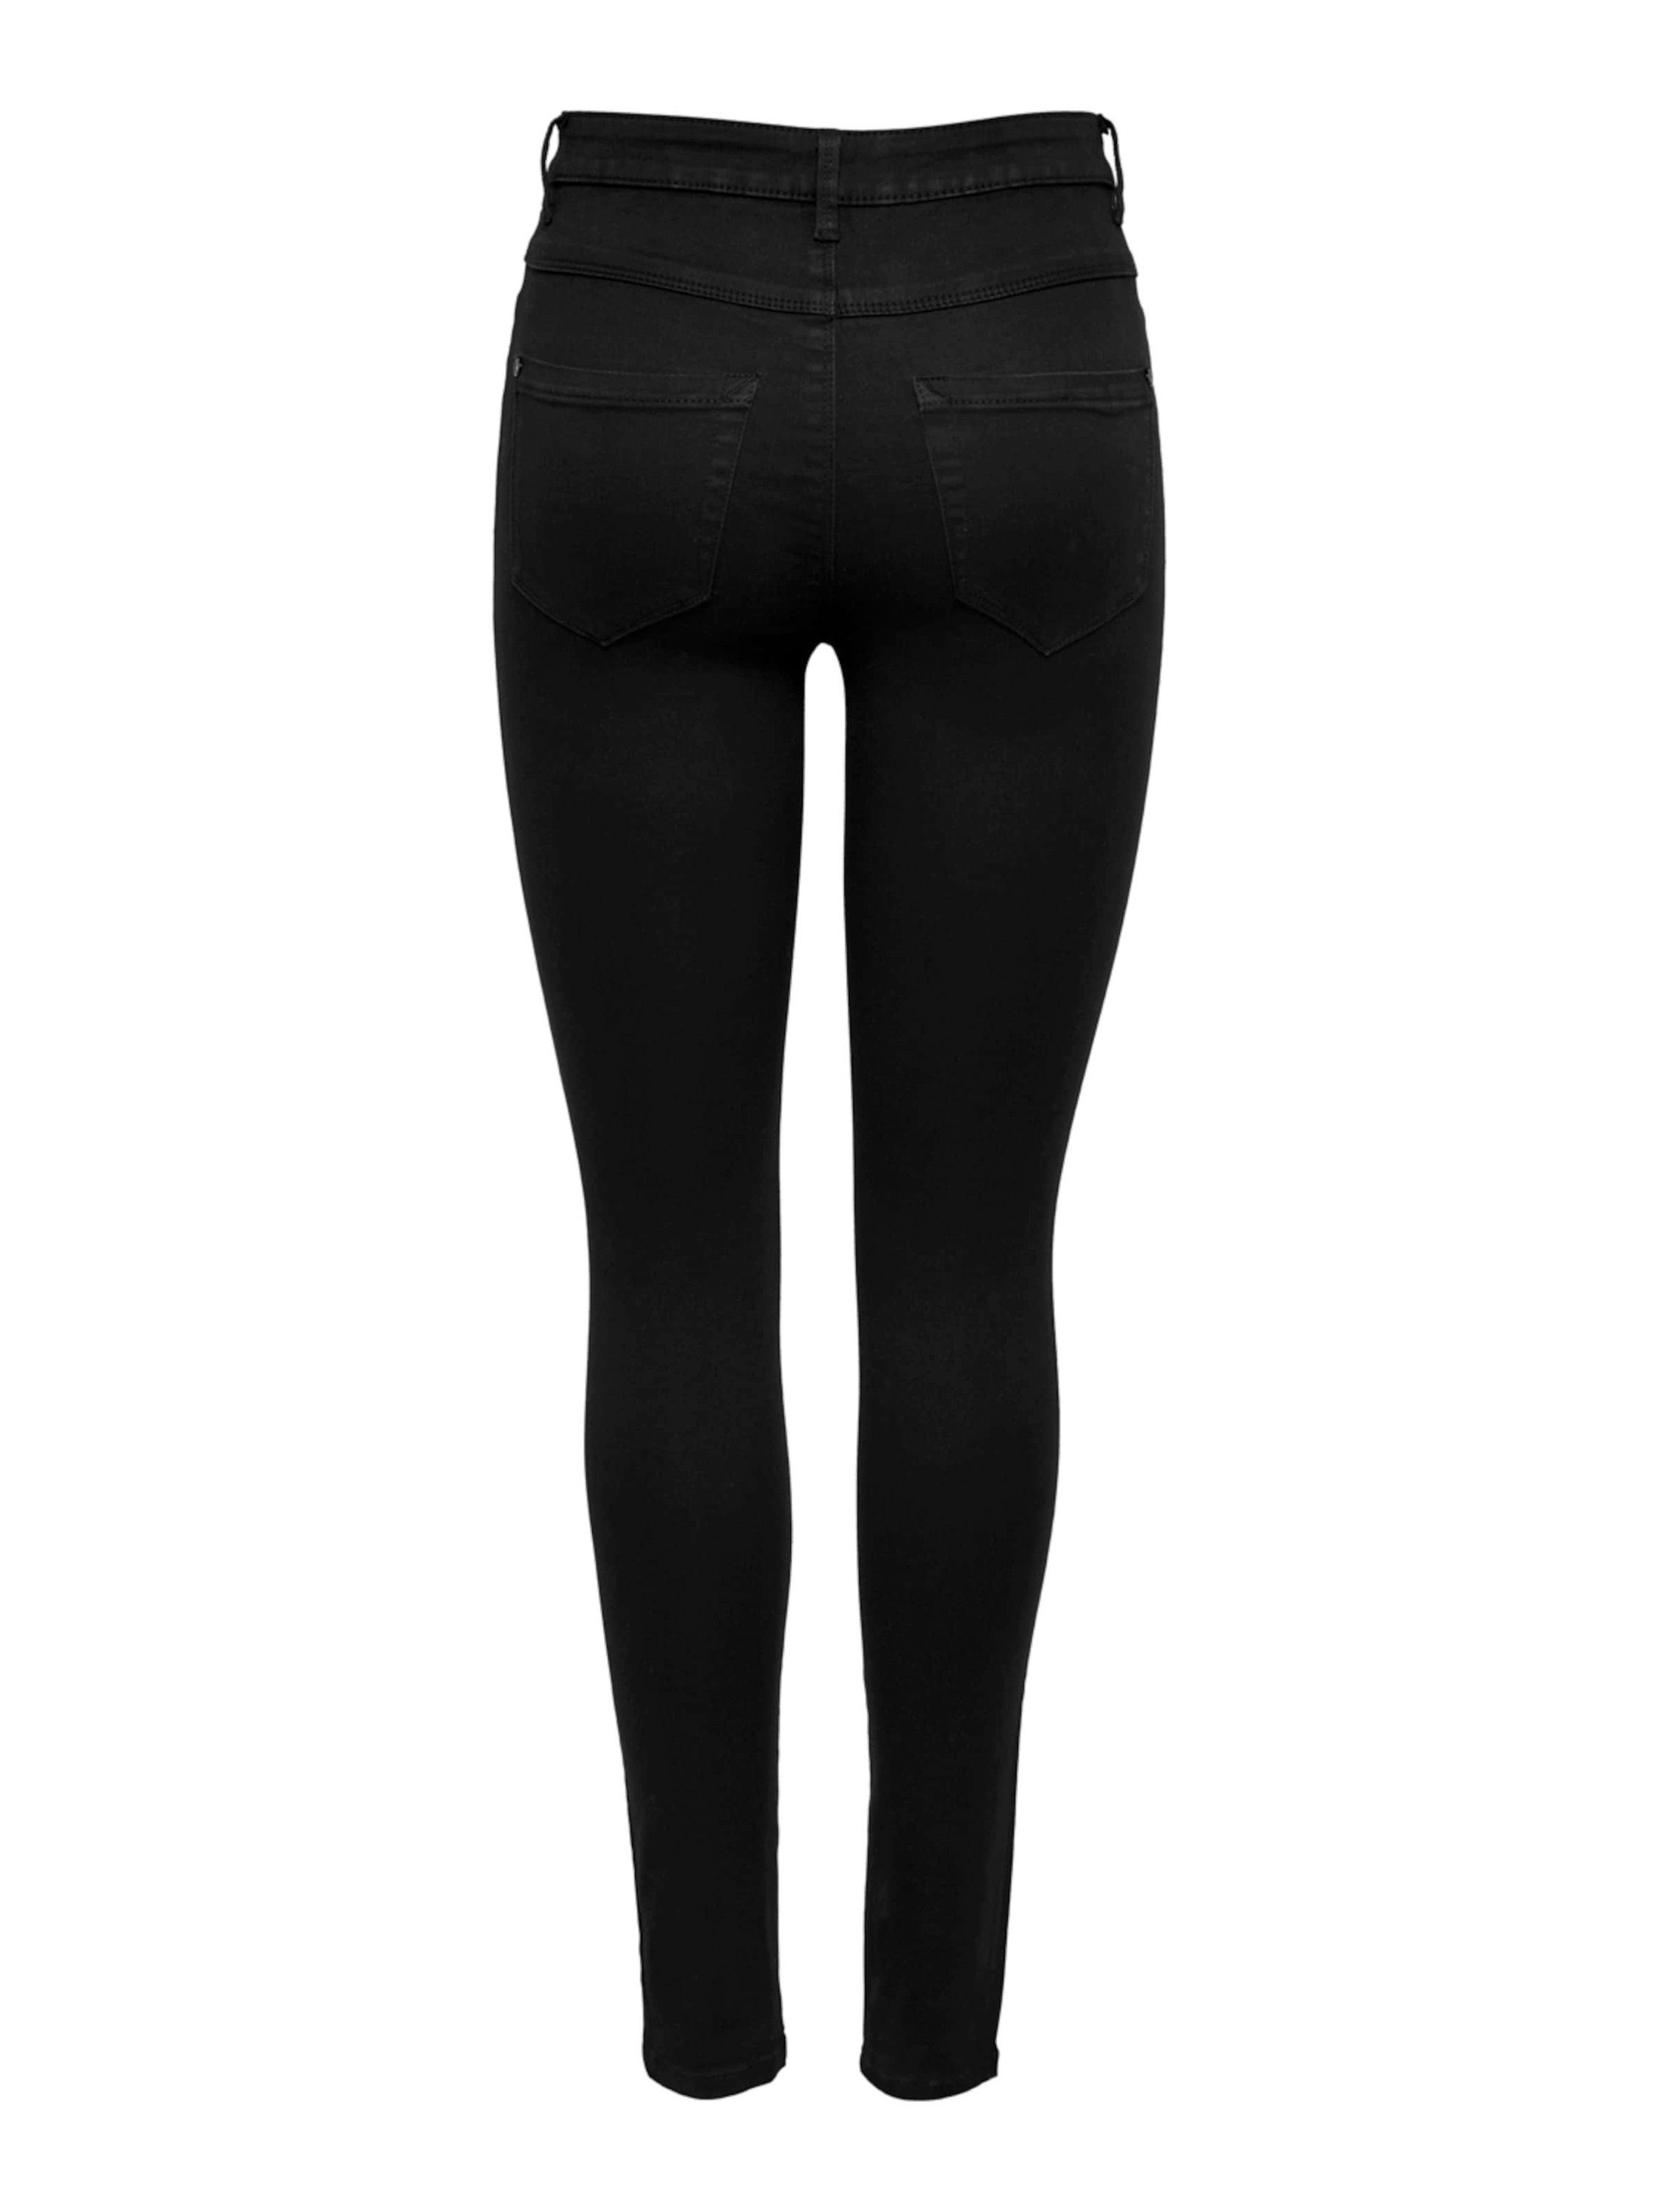 Royal (1-tlg) ONLY Details Plain/ohne Tall Skinny-fit-Jeans